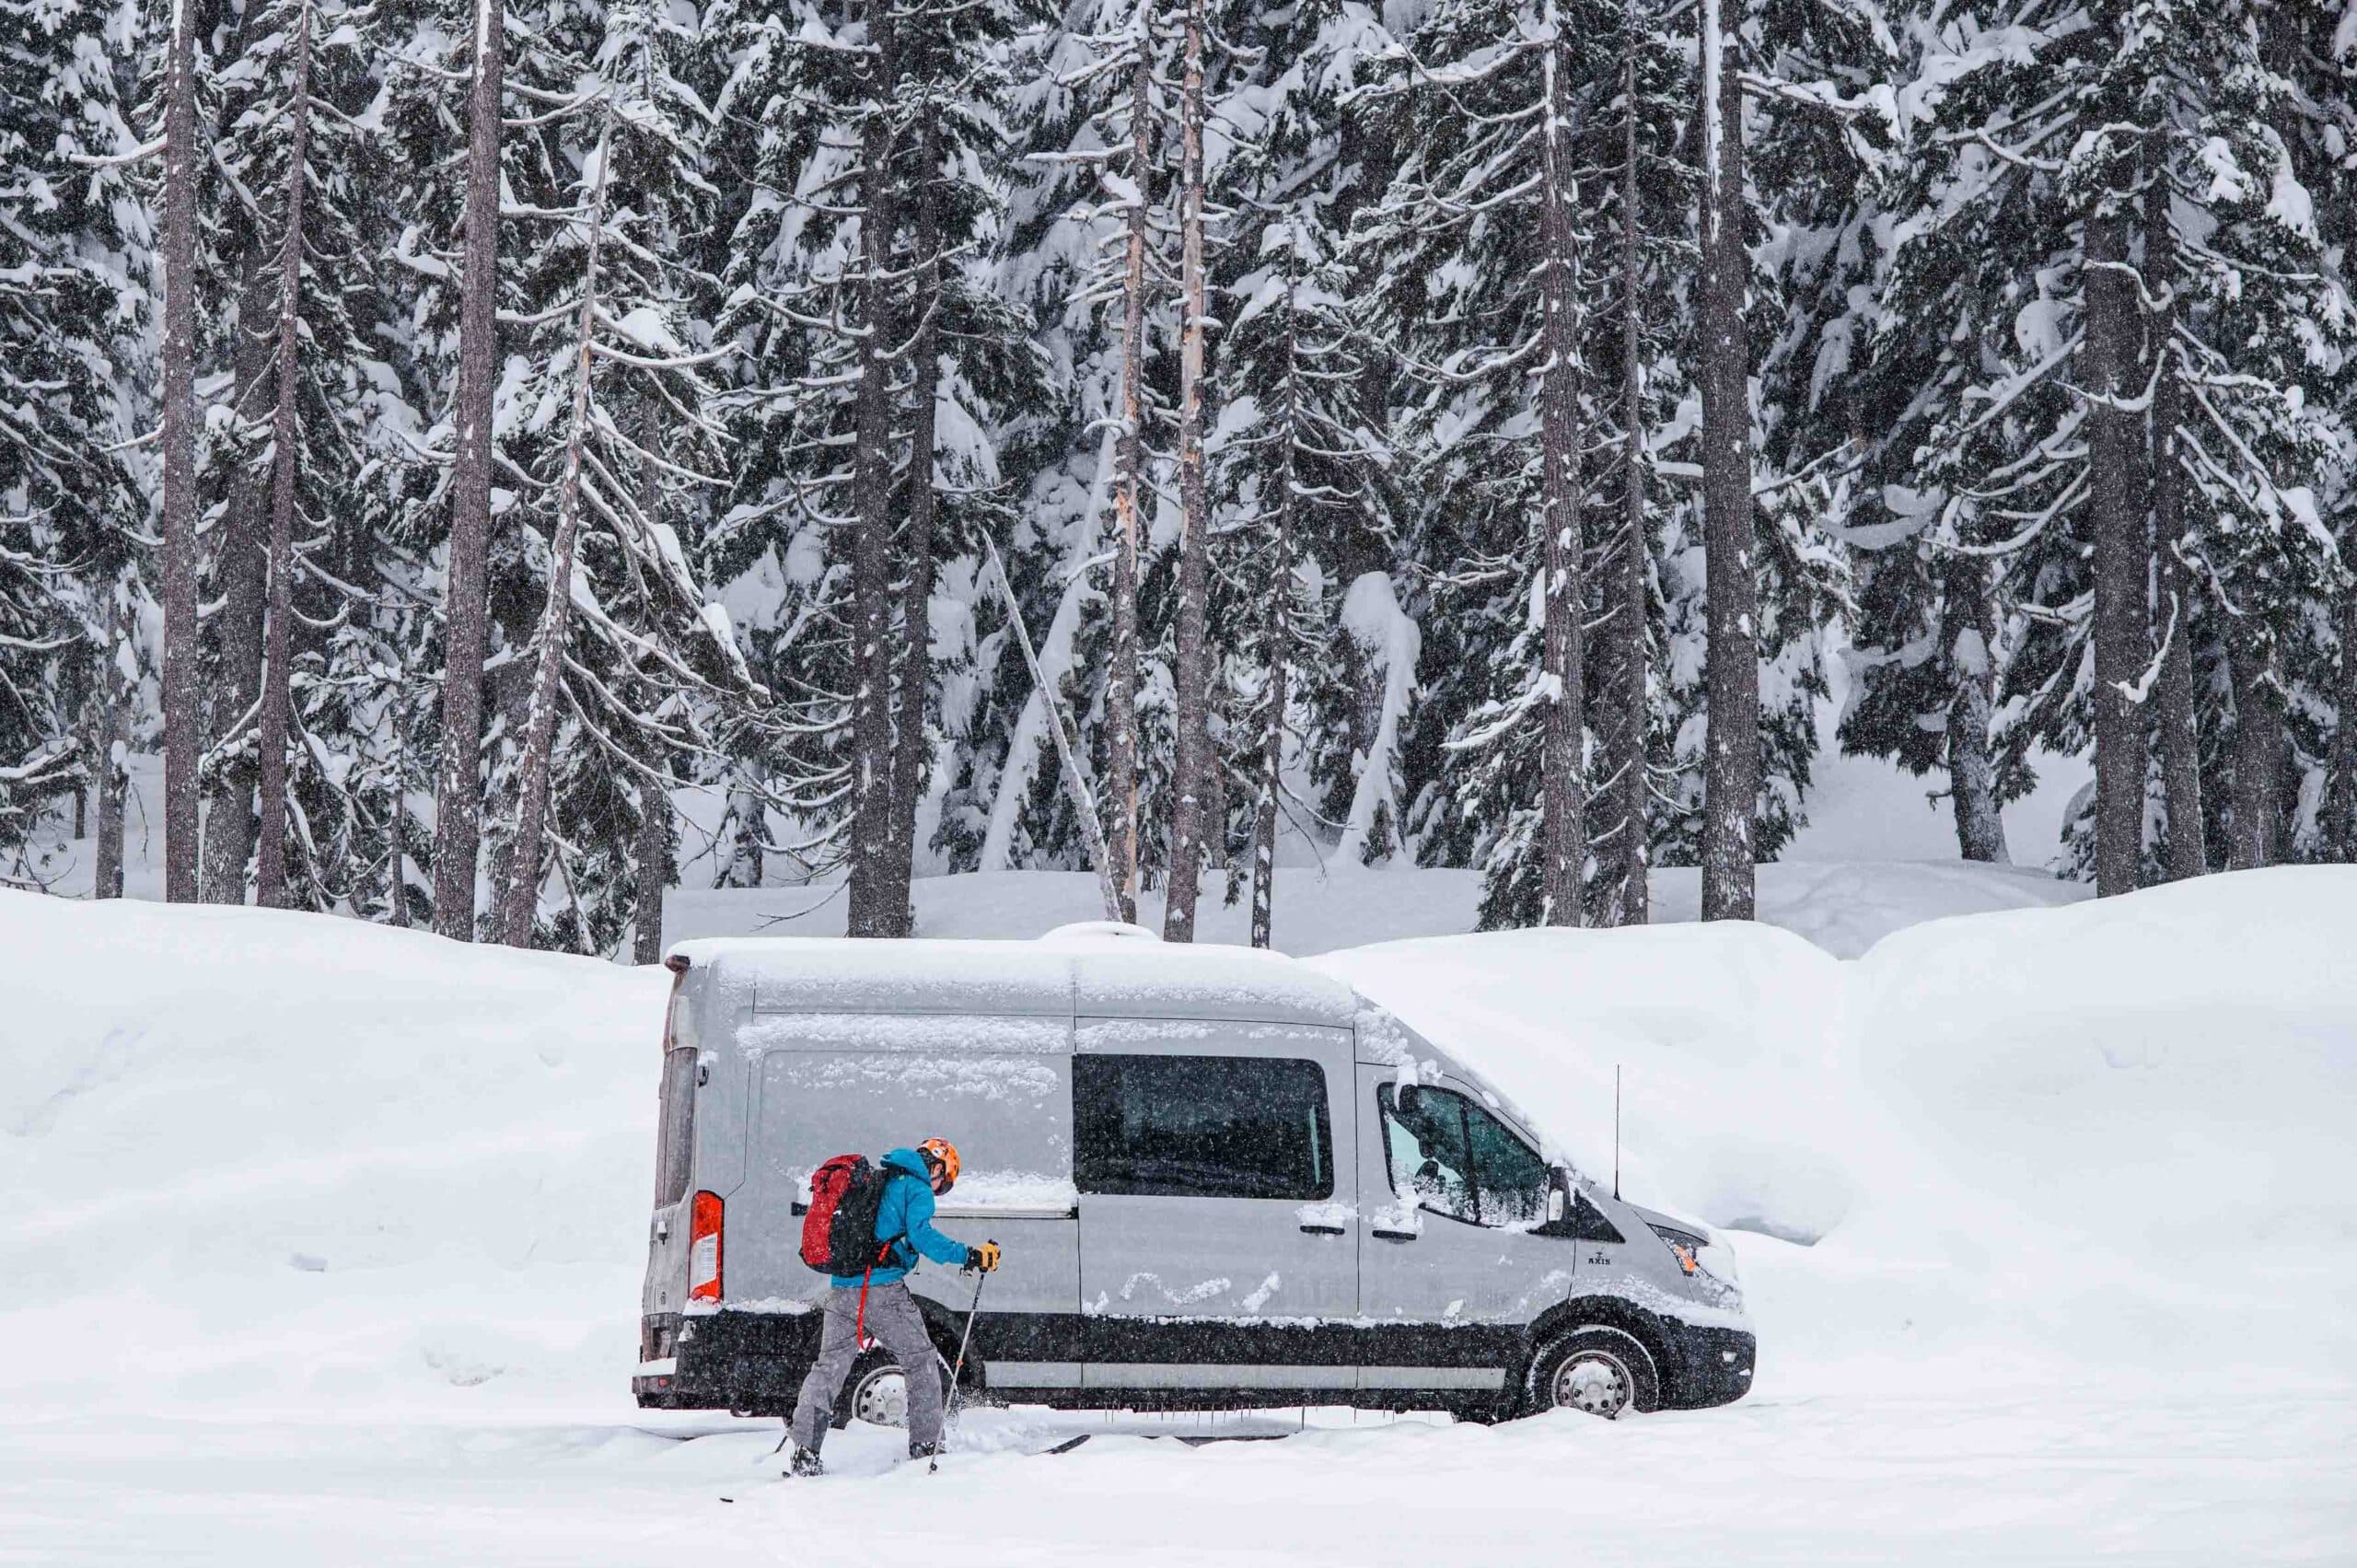 A man wearing snow skis outside of a van boondocking while covered in snow